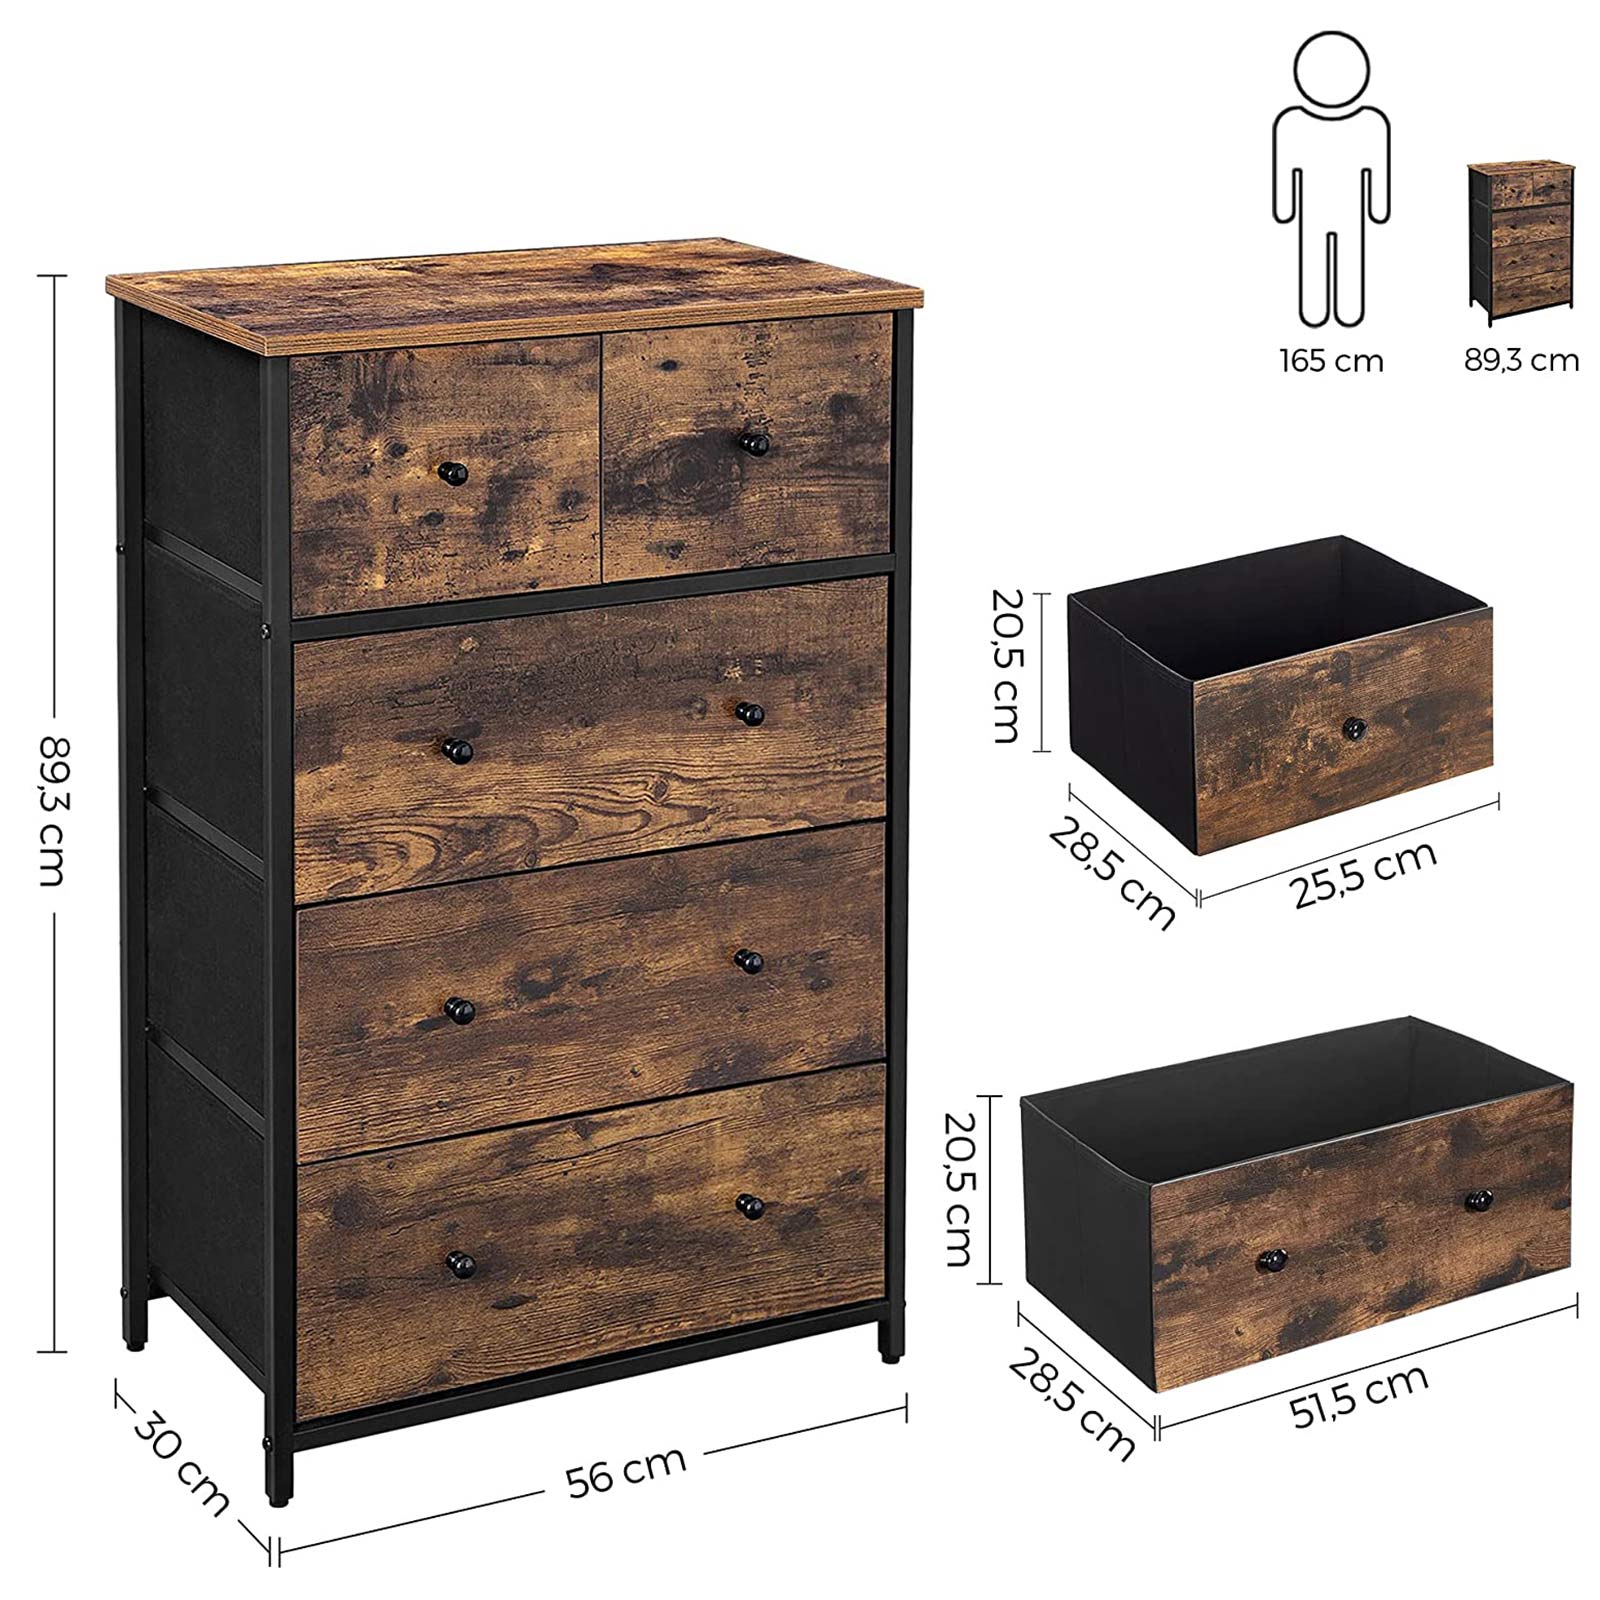 Chest of Drawers, Fabric 5-Drawer Storage Organiser Unit, Wooden Front and Top, Industrial Style Dresser Unit, SONGMICS, 5